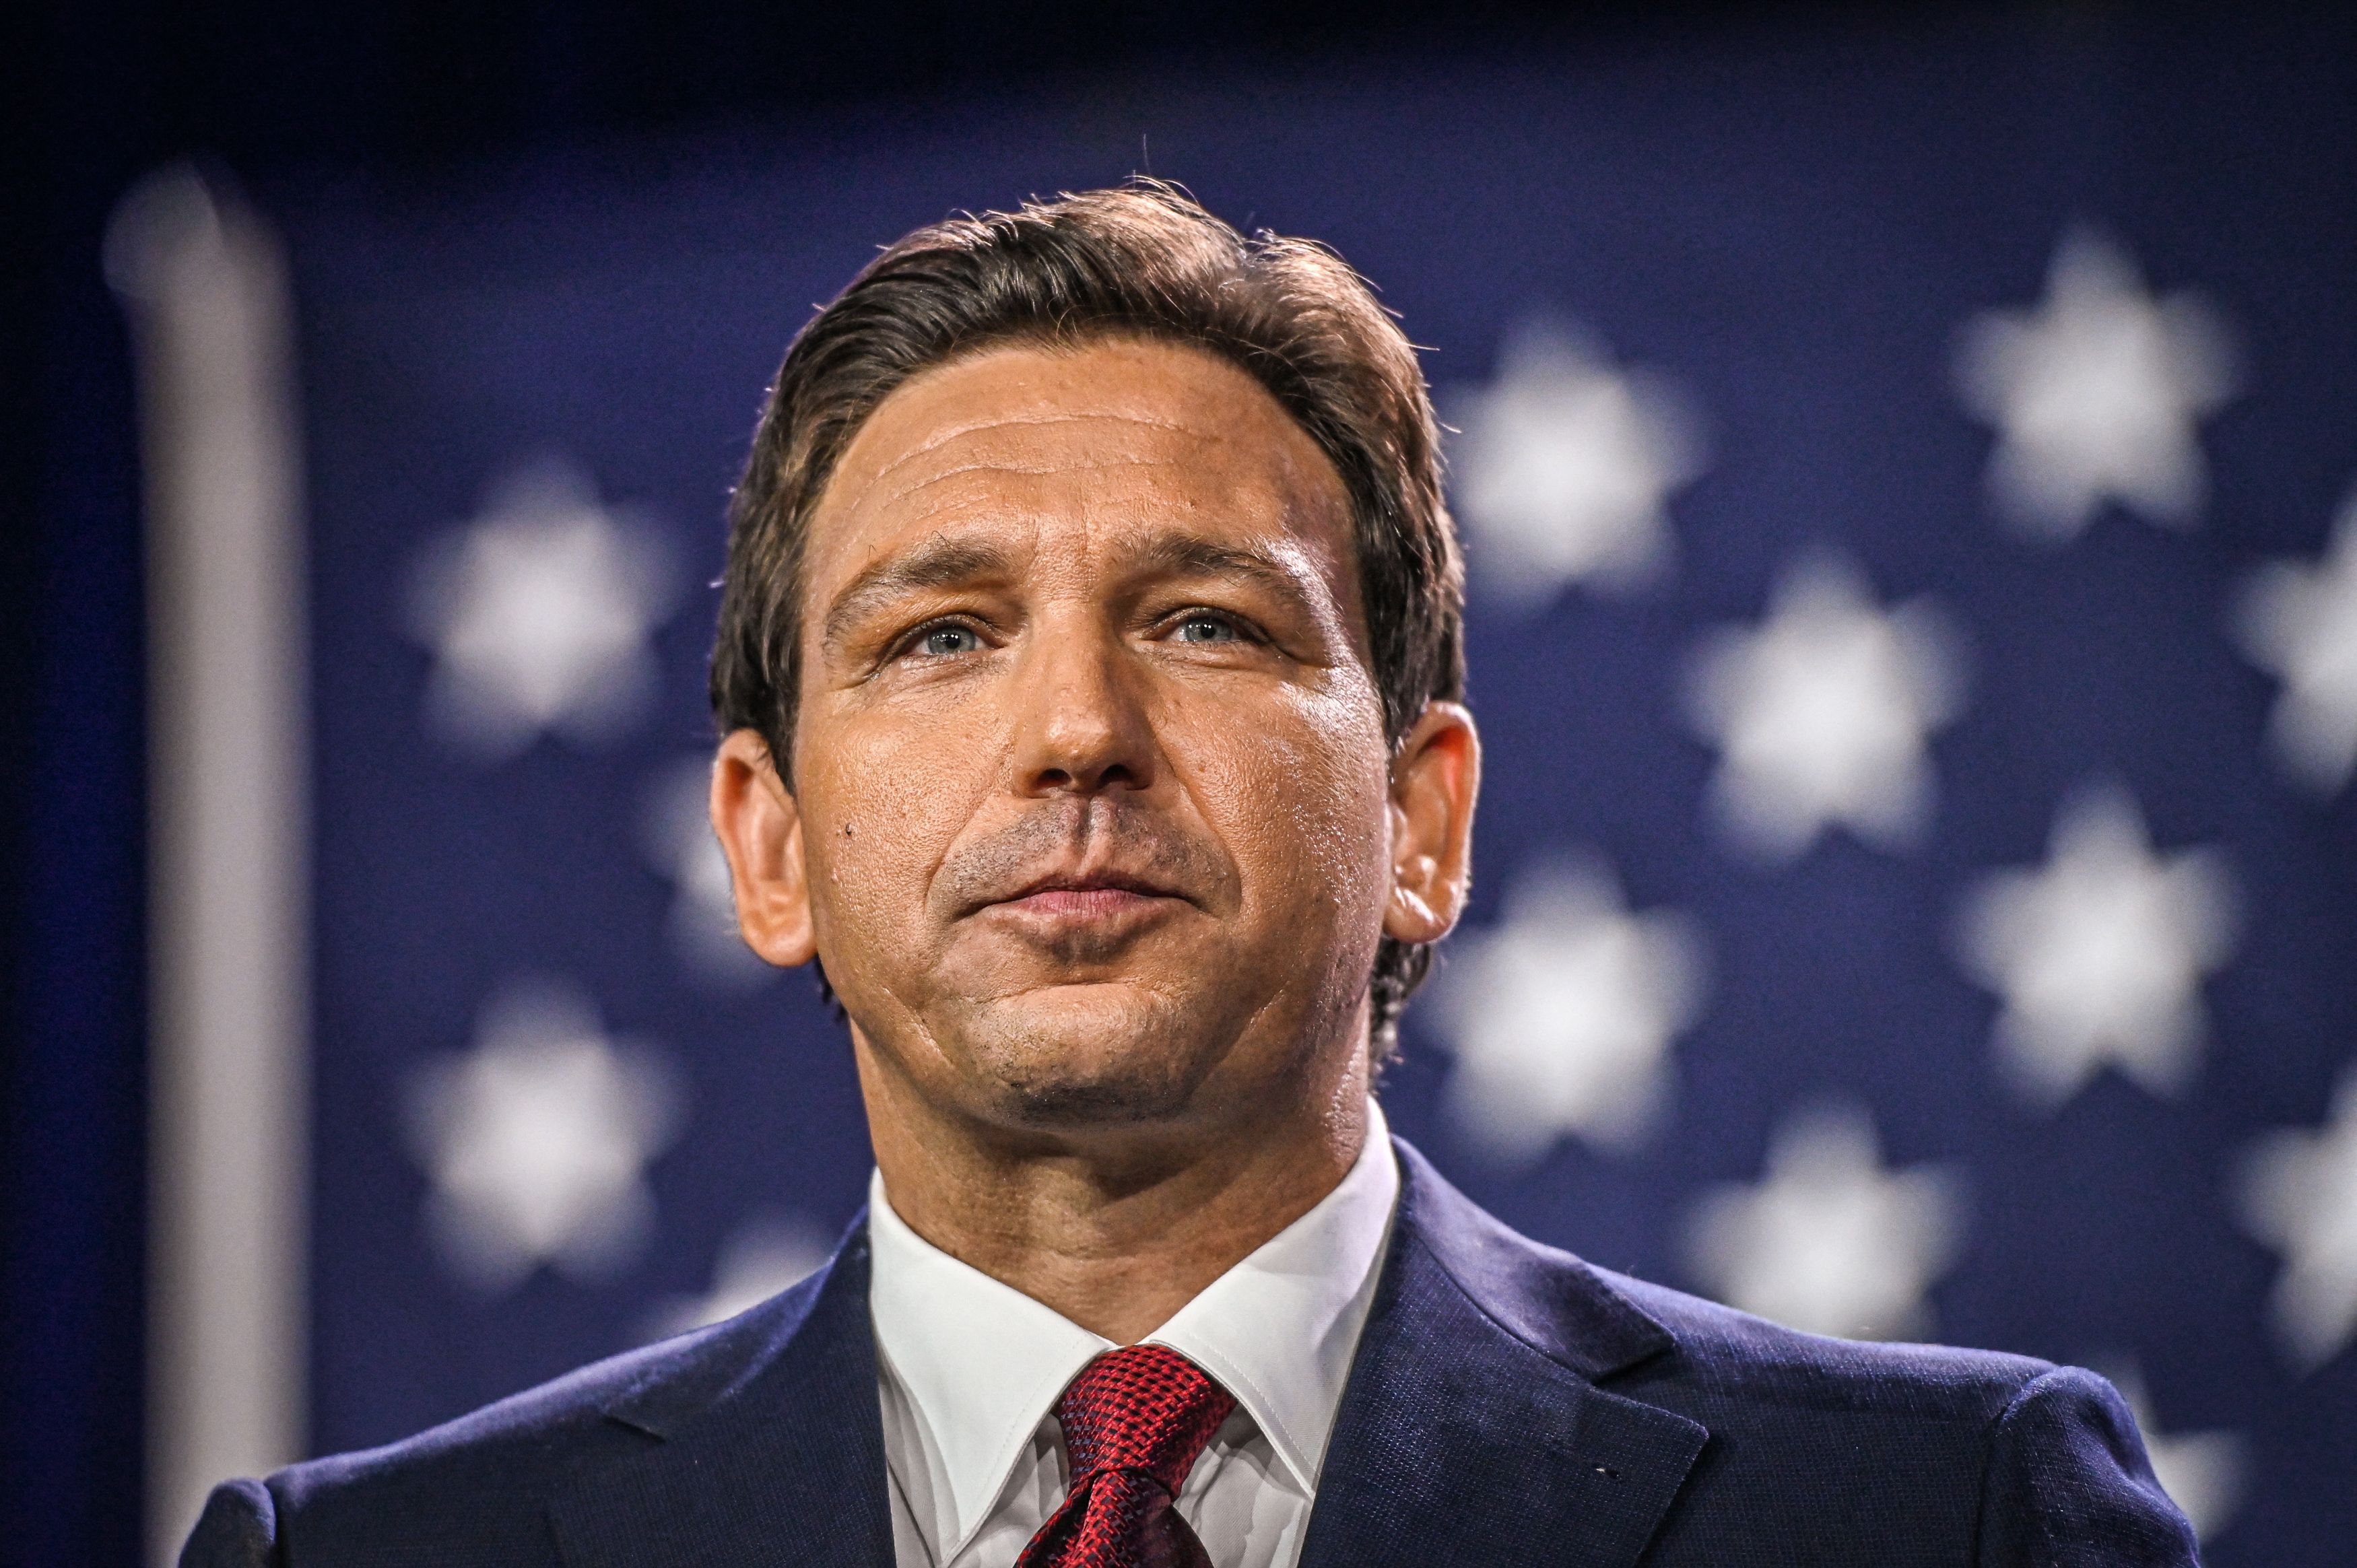 A portrait of DeSantis, clean shaven in a navy suit, red tie, and white shirt. He bears a serious expression, the US flag stretched out behind him.